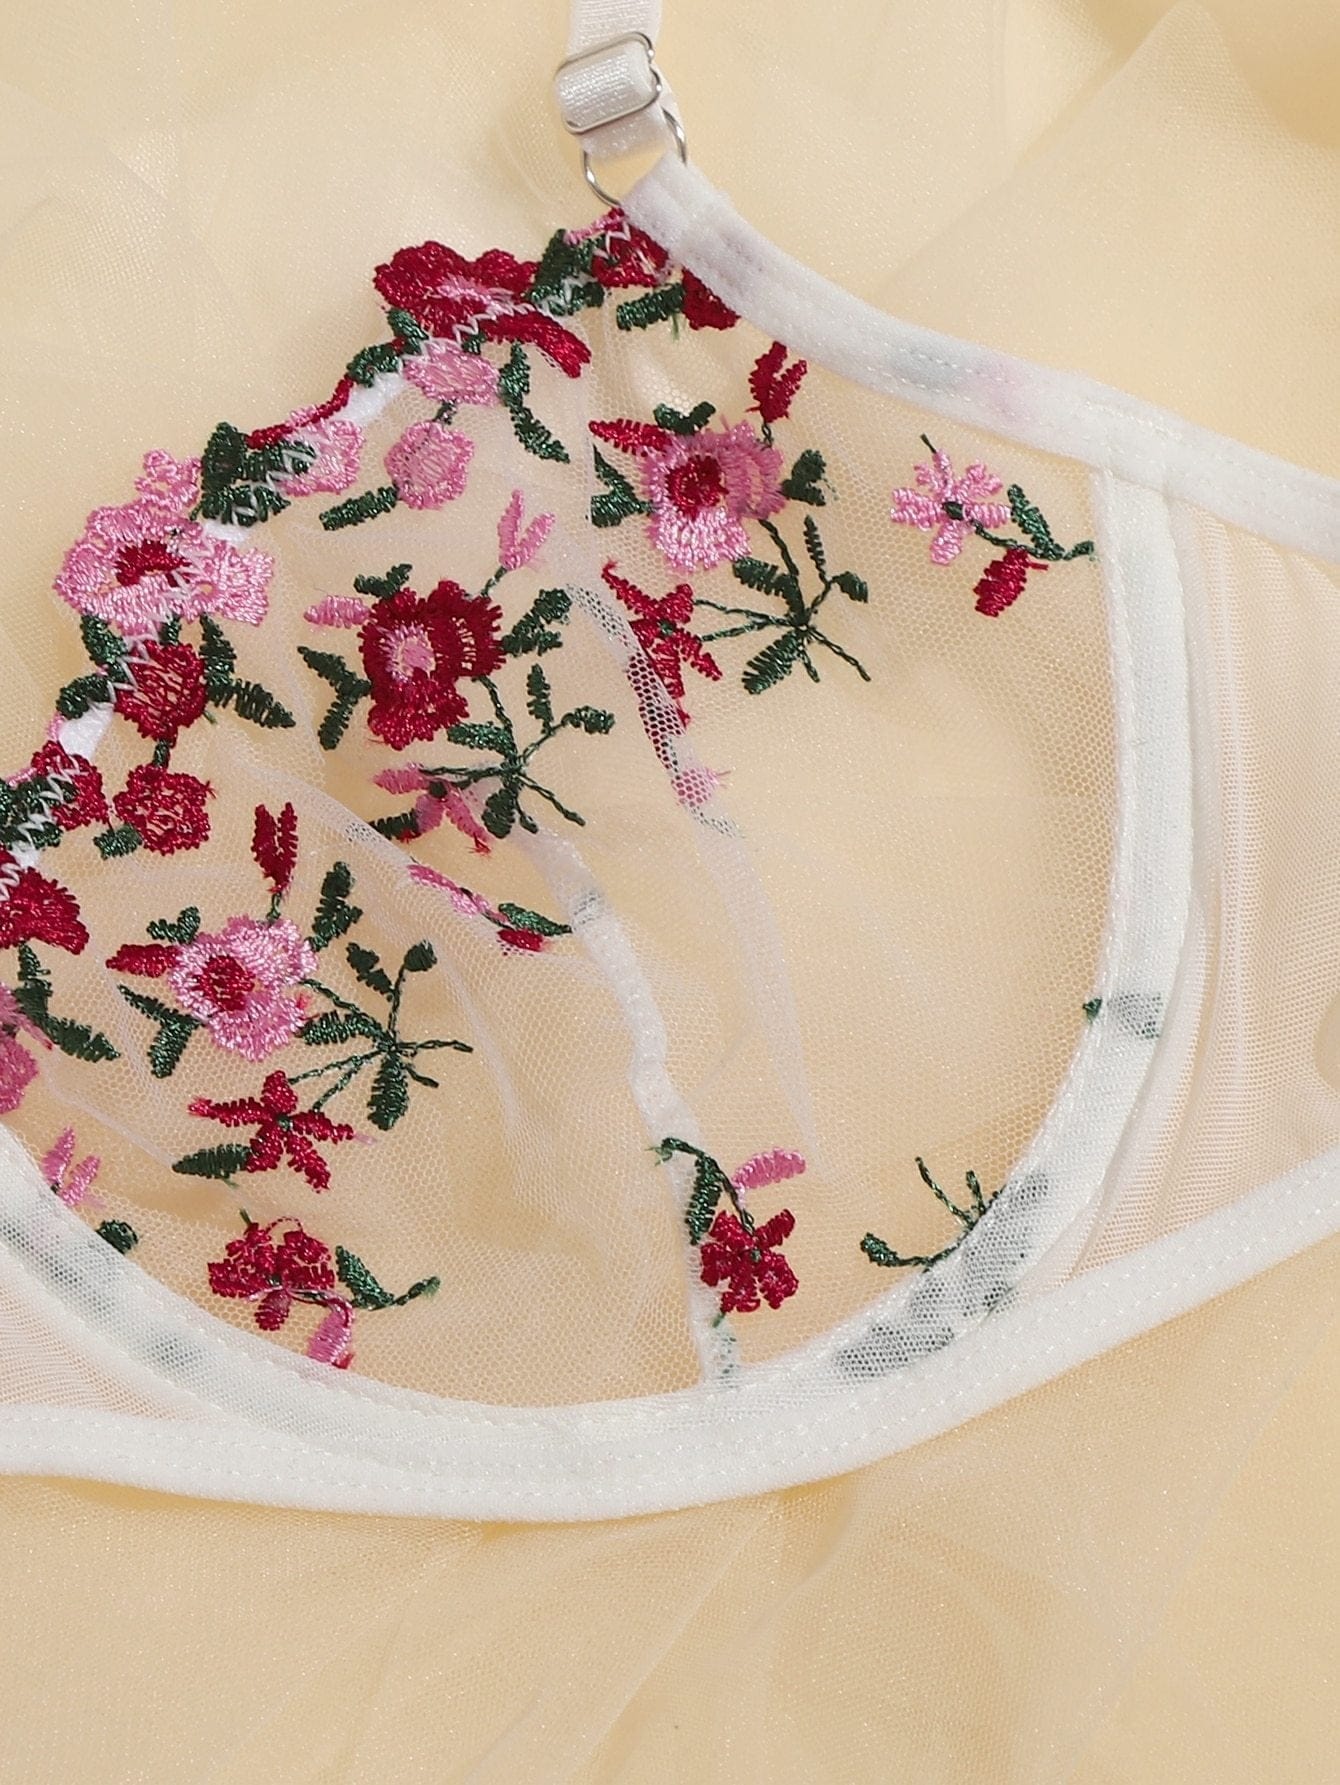 Floral Embroidered Mesh Underwire Lingerie Set